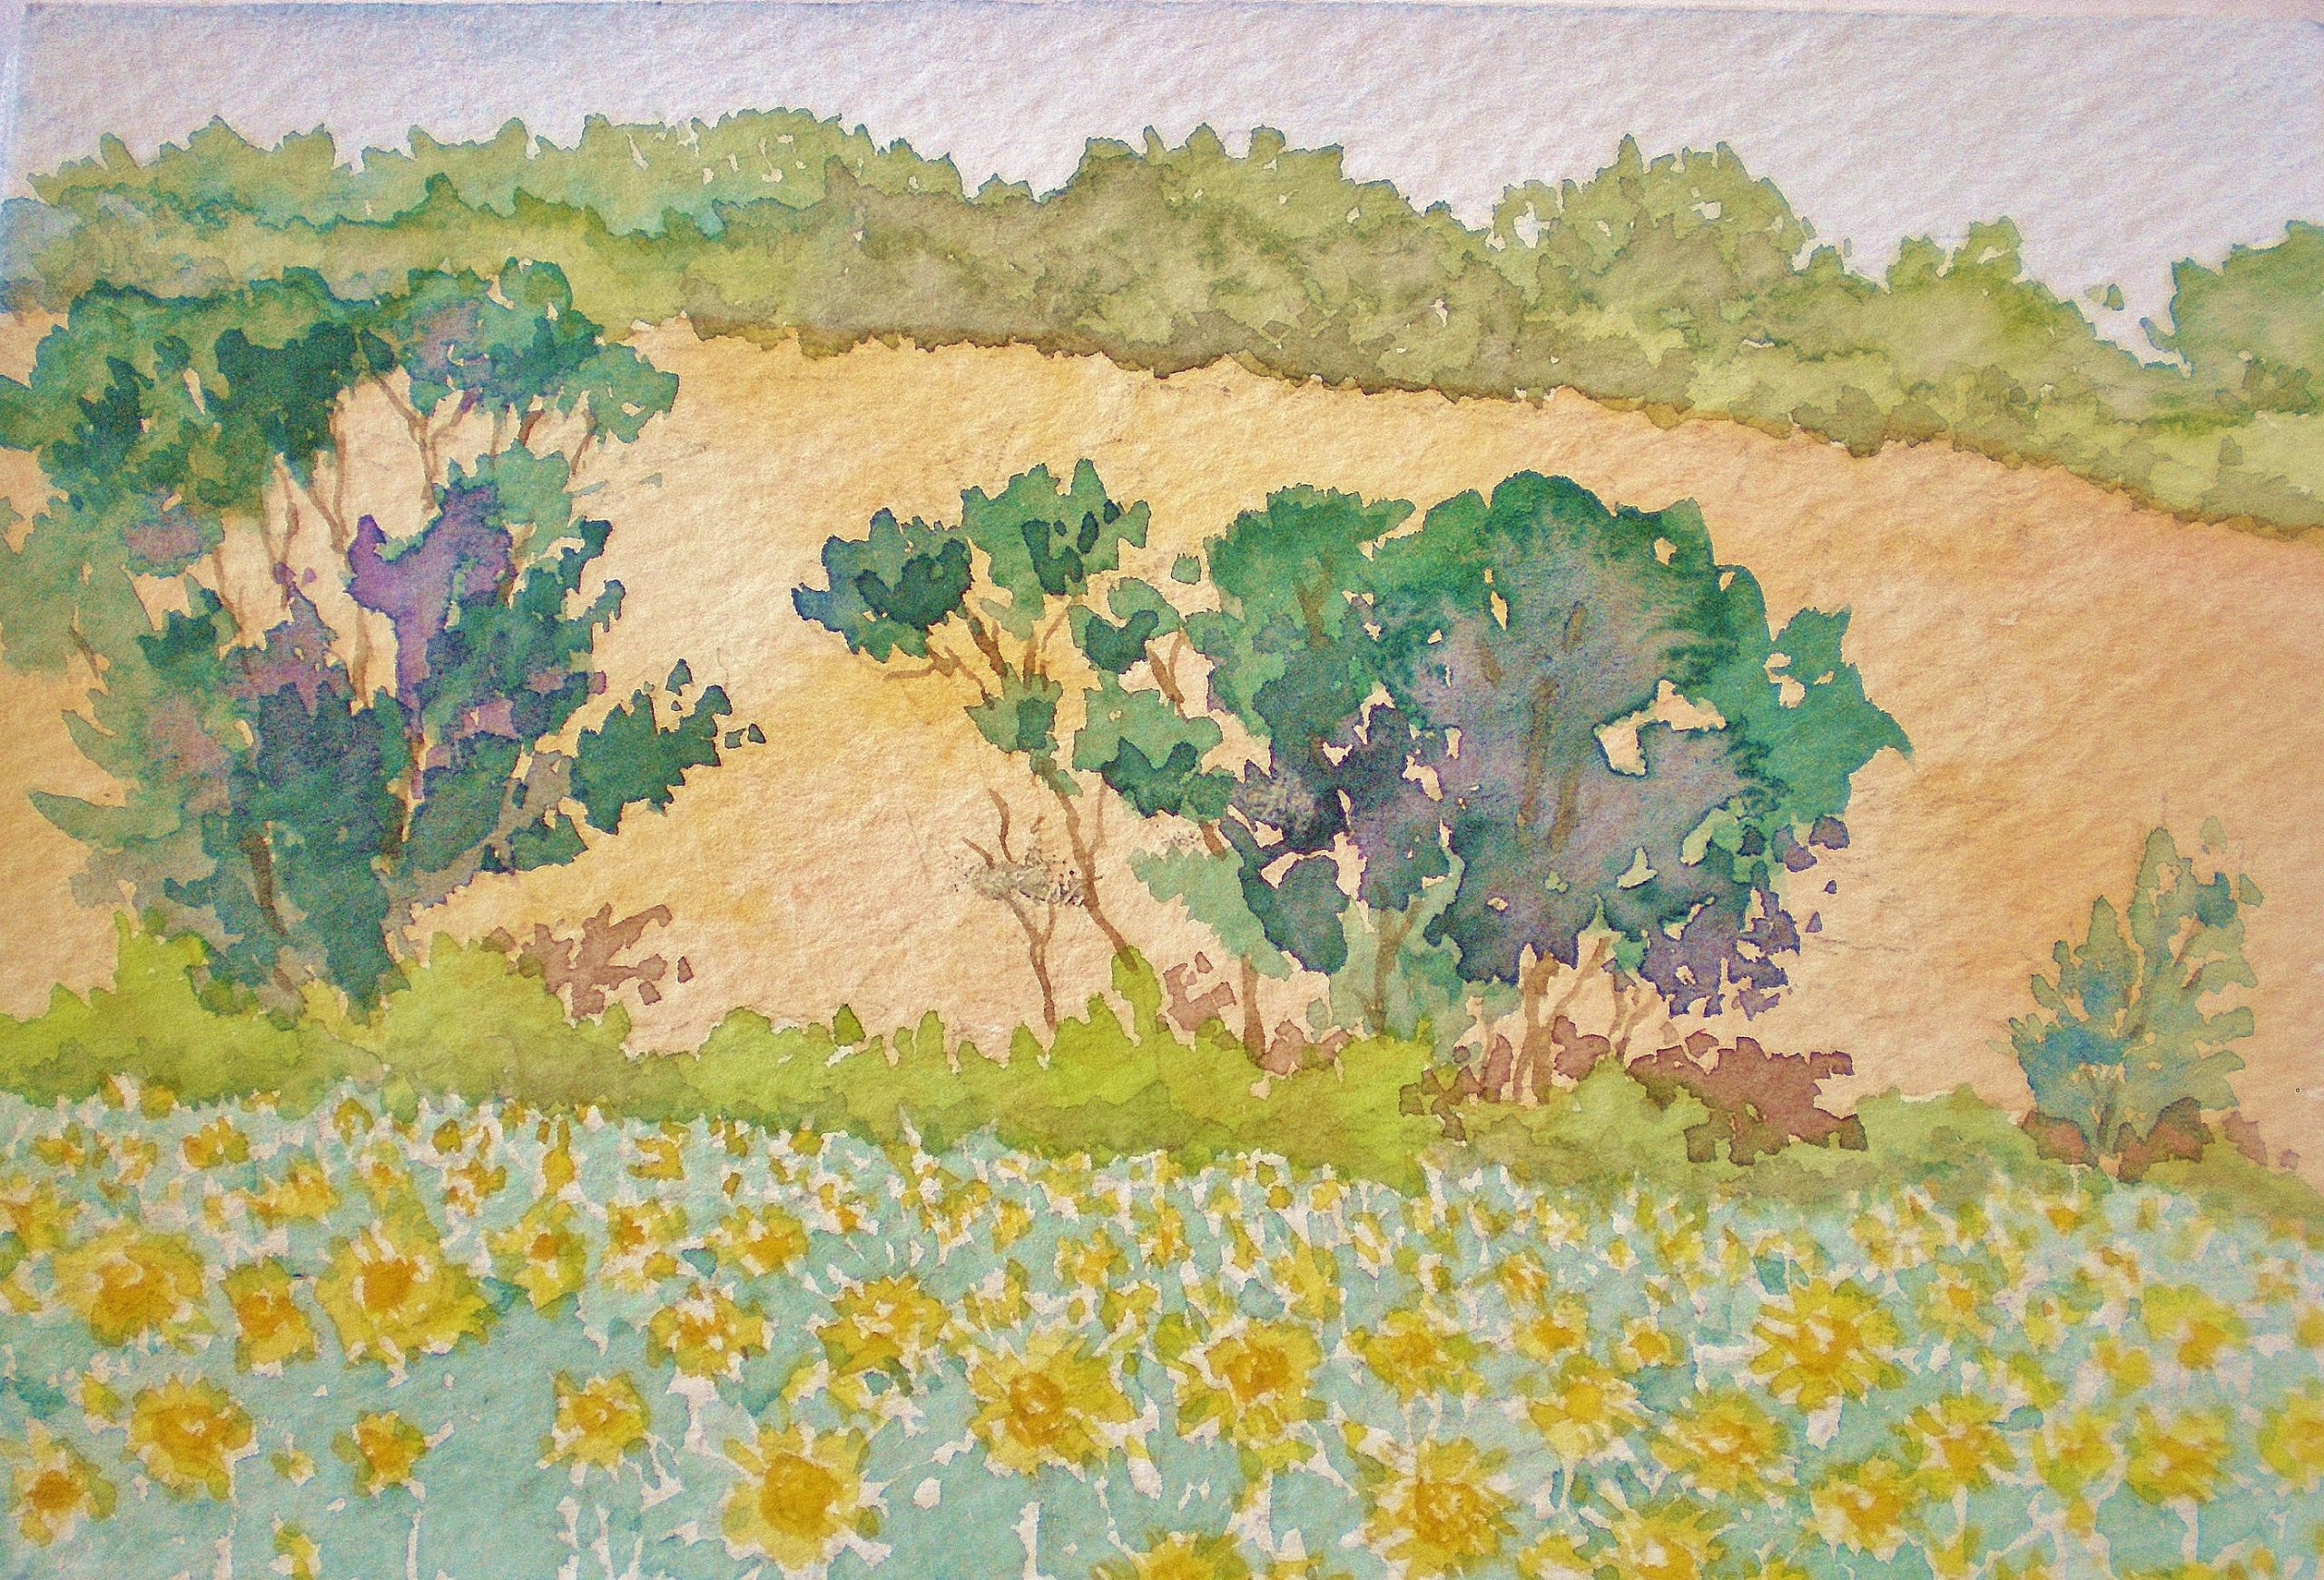 Sunflower Field by Linda Greigg $225, Watercolor Painting